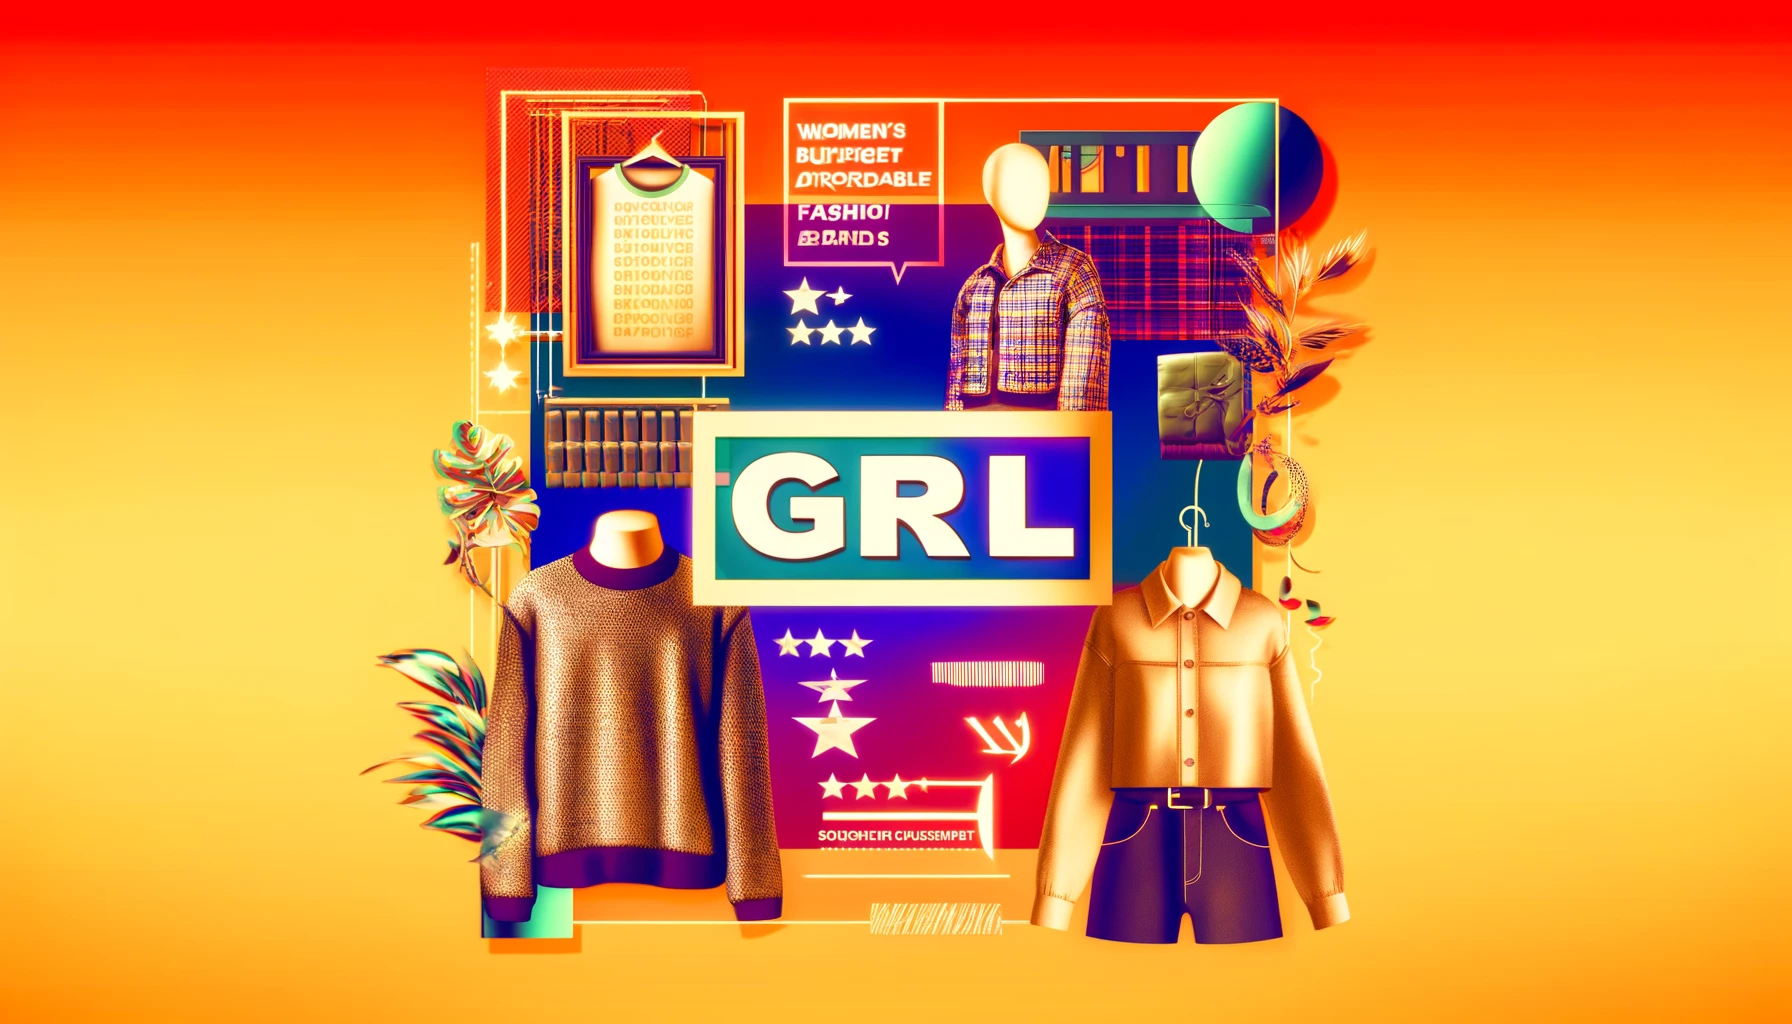 A stylish layout for a women's budget fashion brand named 'GRL' with a focus on reviews. The image features trendy and affordable clothing items displayed attractively, with visual elements representing customer reviews and feedback. Incorporate the word 'GRL' prominently in the design. The background should be vibrant and fashionable, reflecting the brand's appeal to young women. The image should be in a 16:9 aspect ratio.